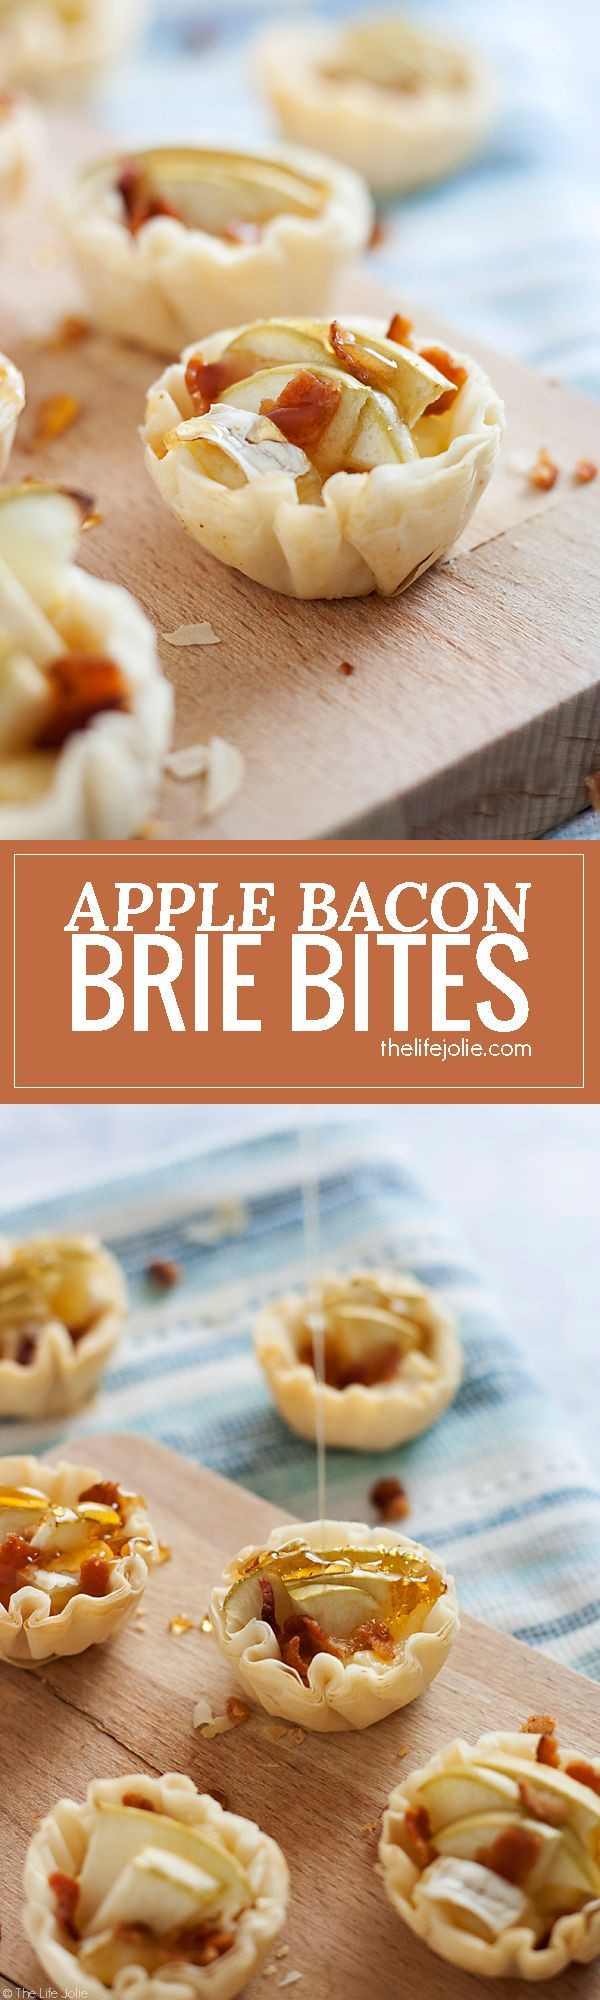 Quick And Easy Thanksgiving Appetizers
 Best 25 Brie bites ideas on Pinterest